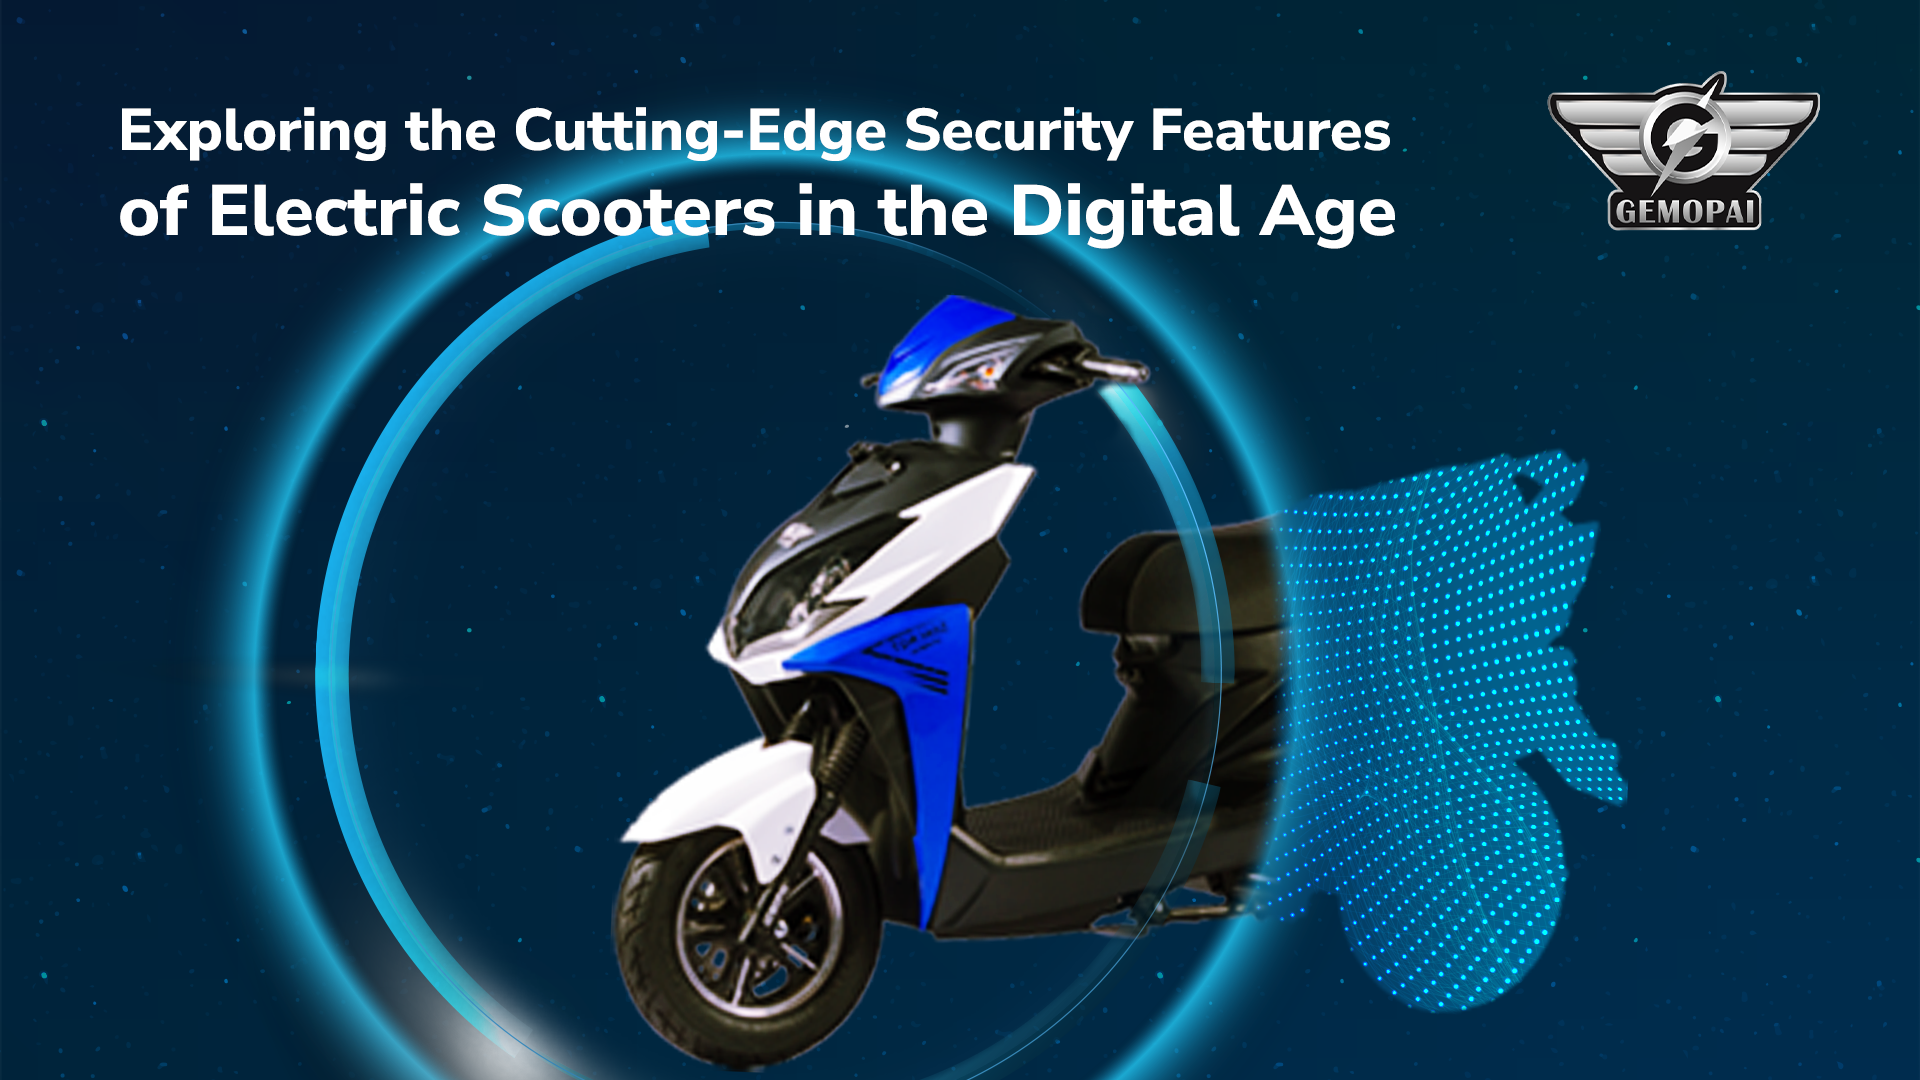 Exploring the Cutting- Edge Security Features of Electric Scooters in the Digital Age